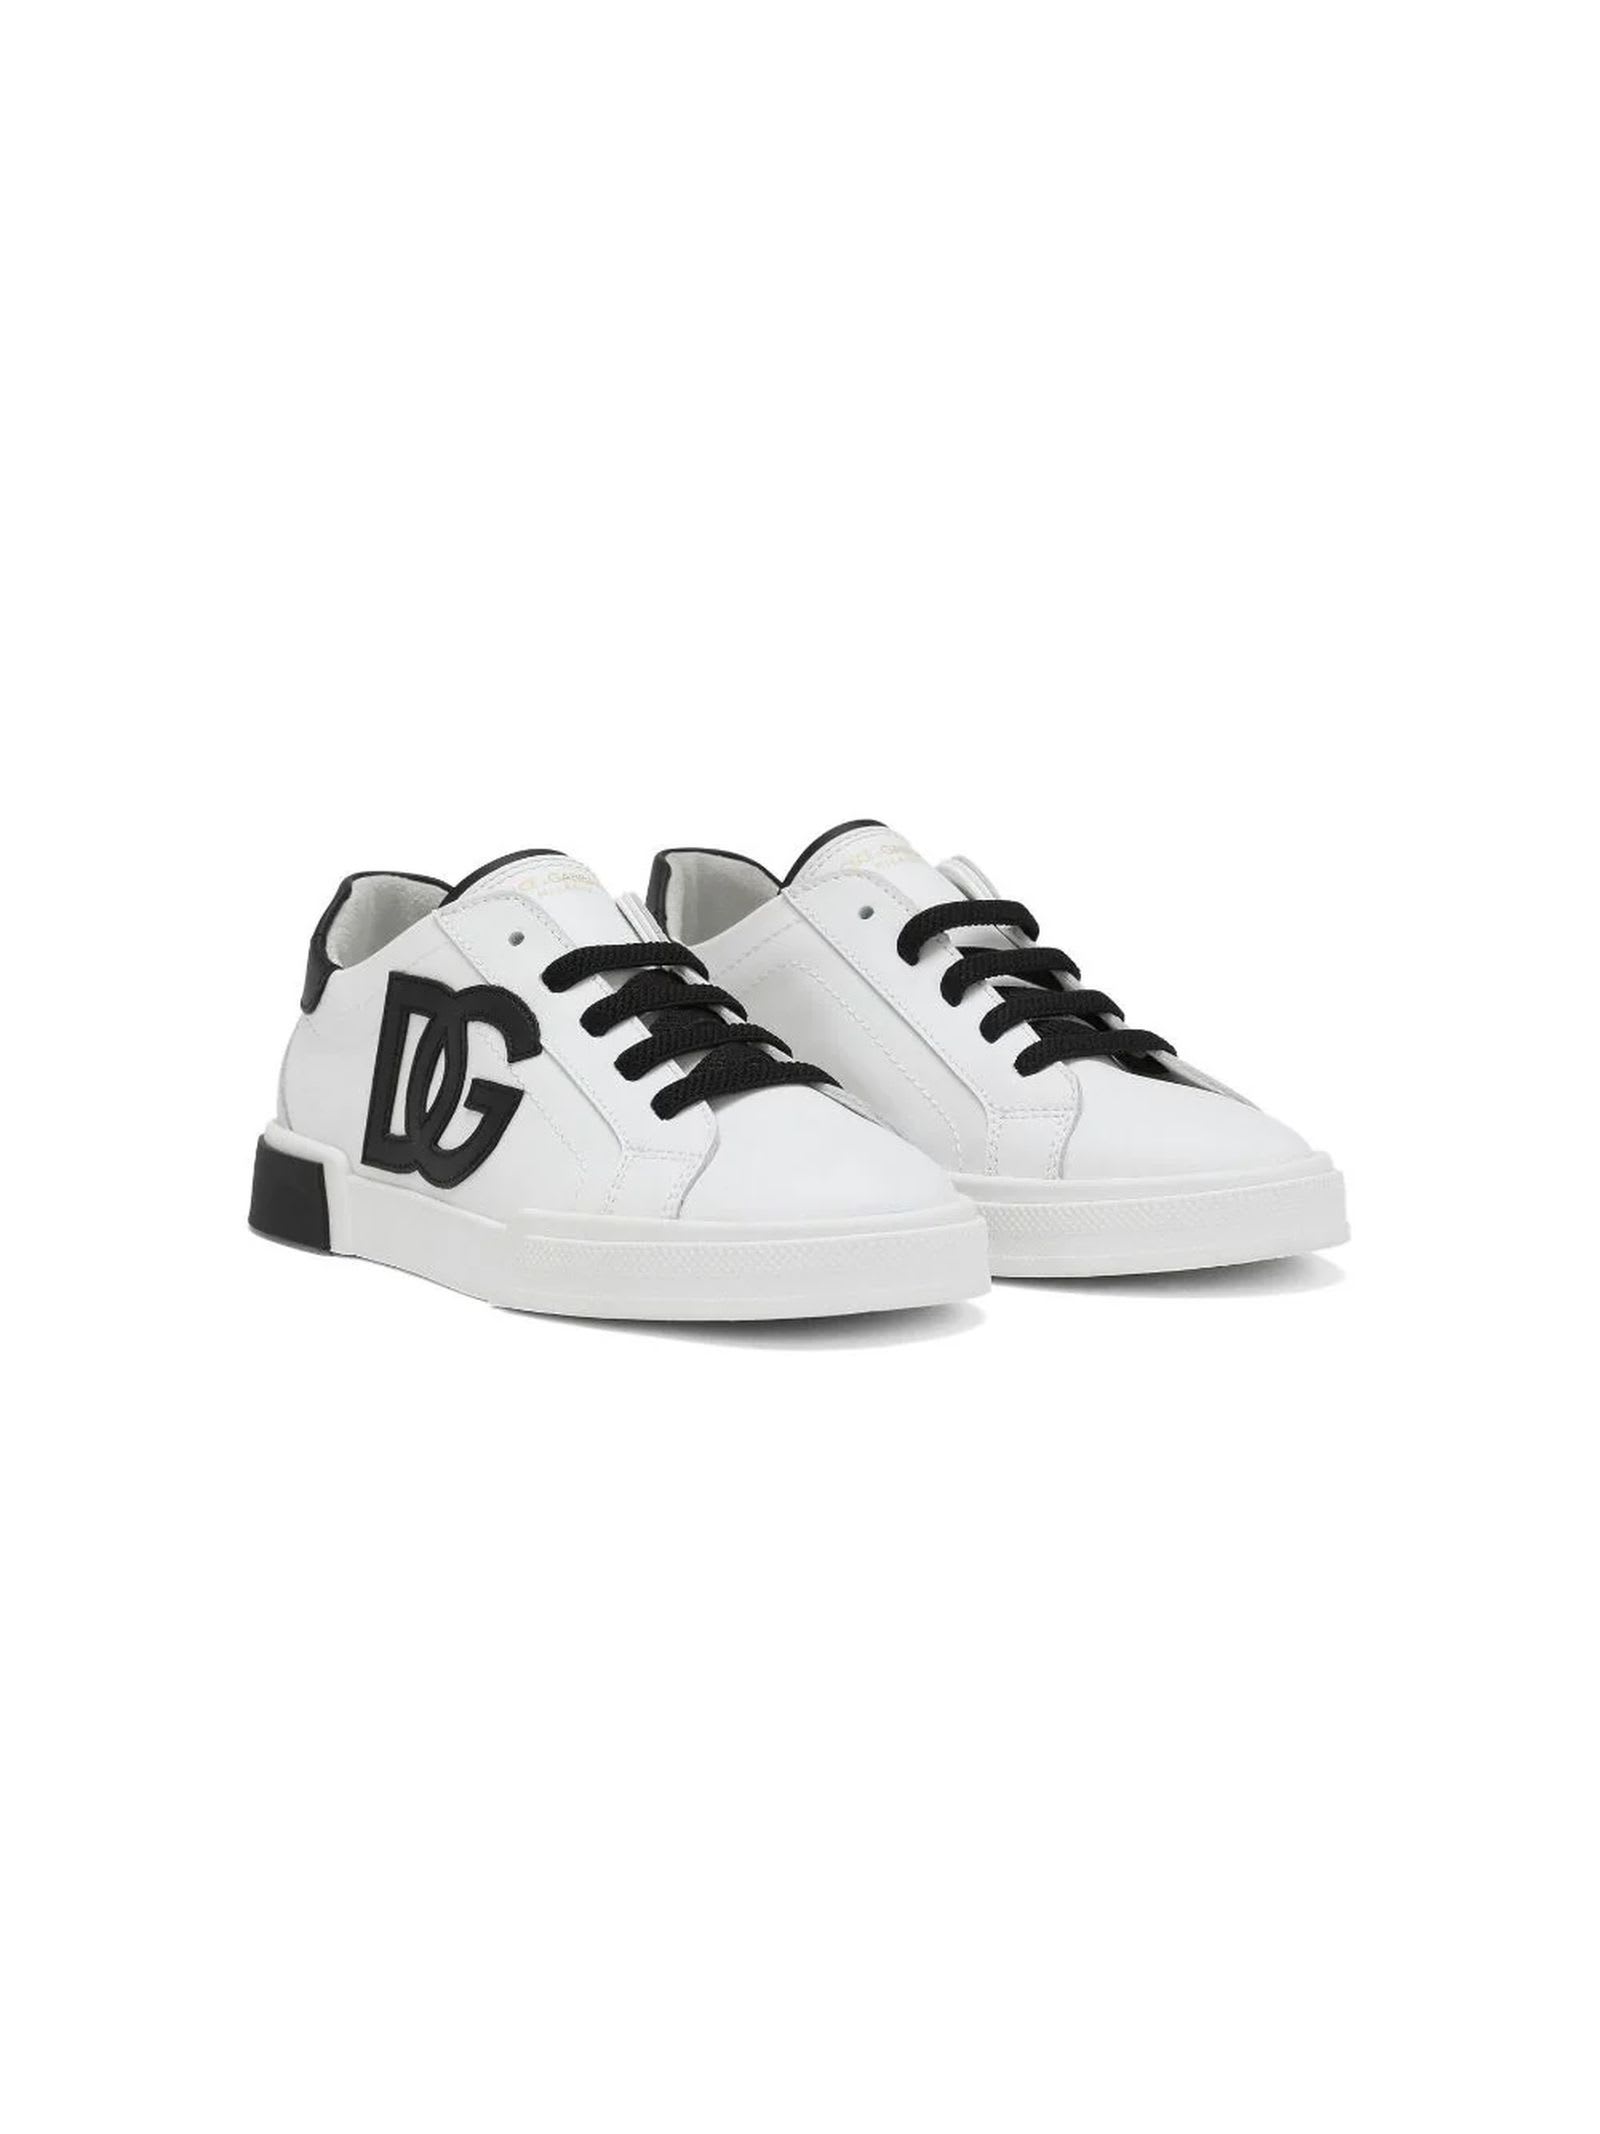 Shop Dolce & Gabbana White Calf Leather Sneakers